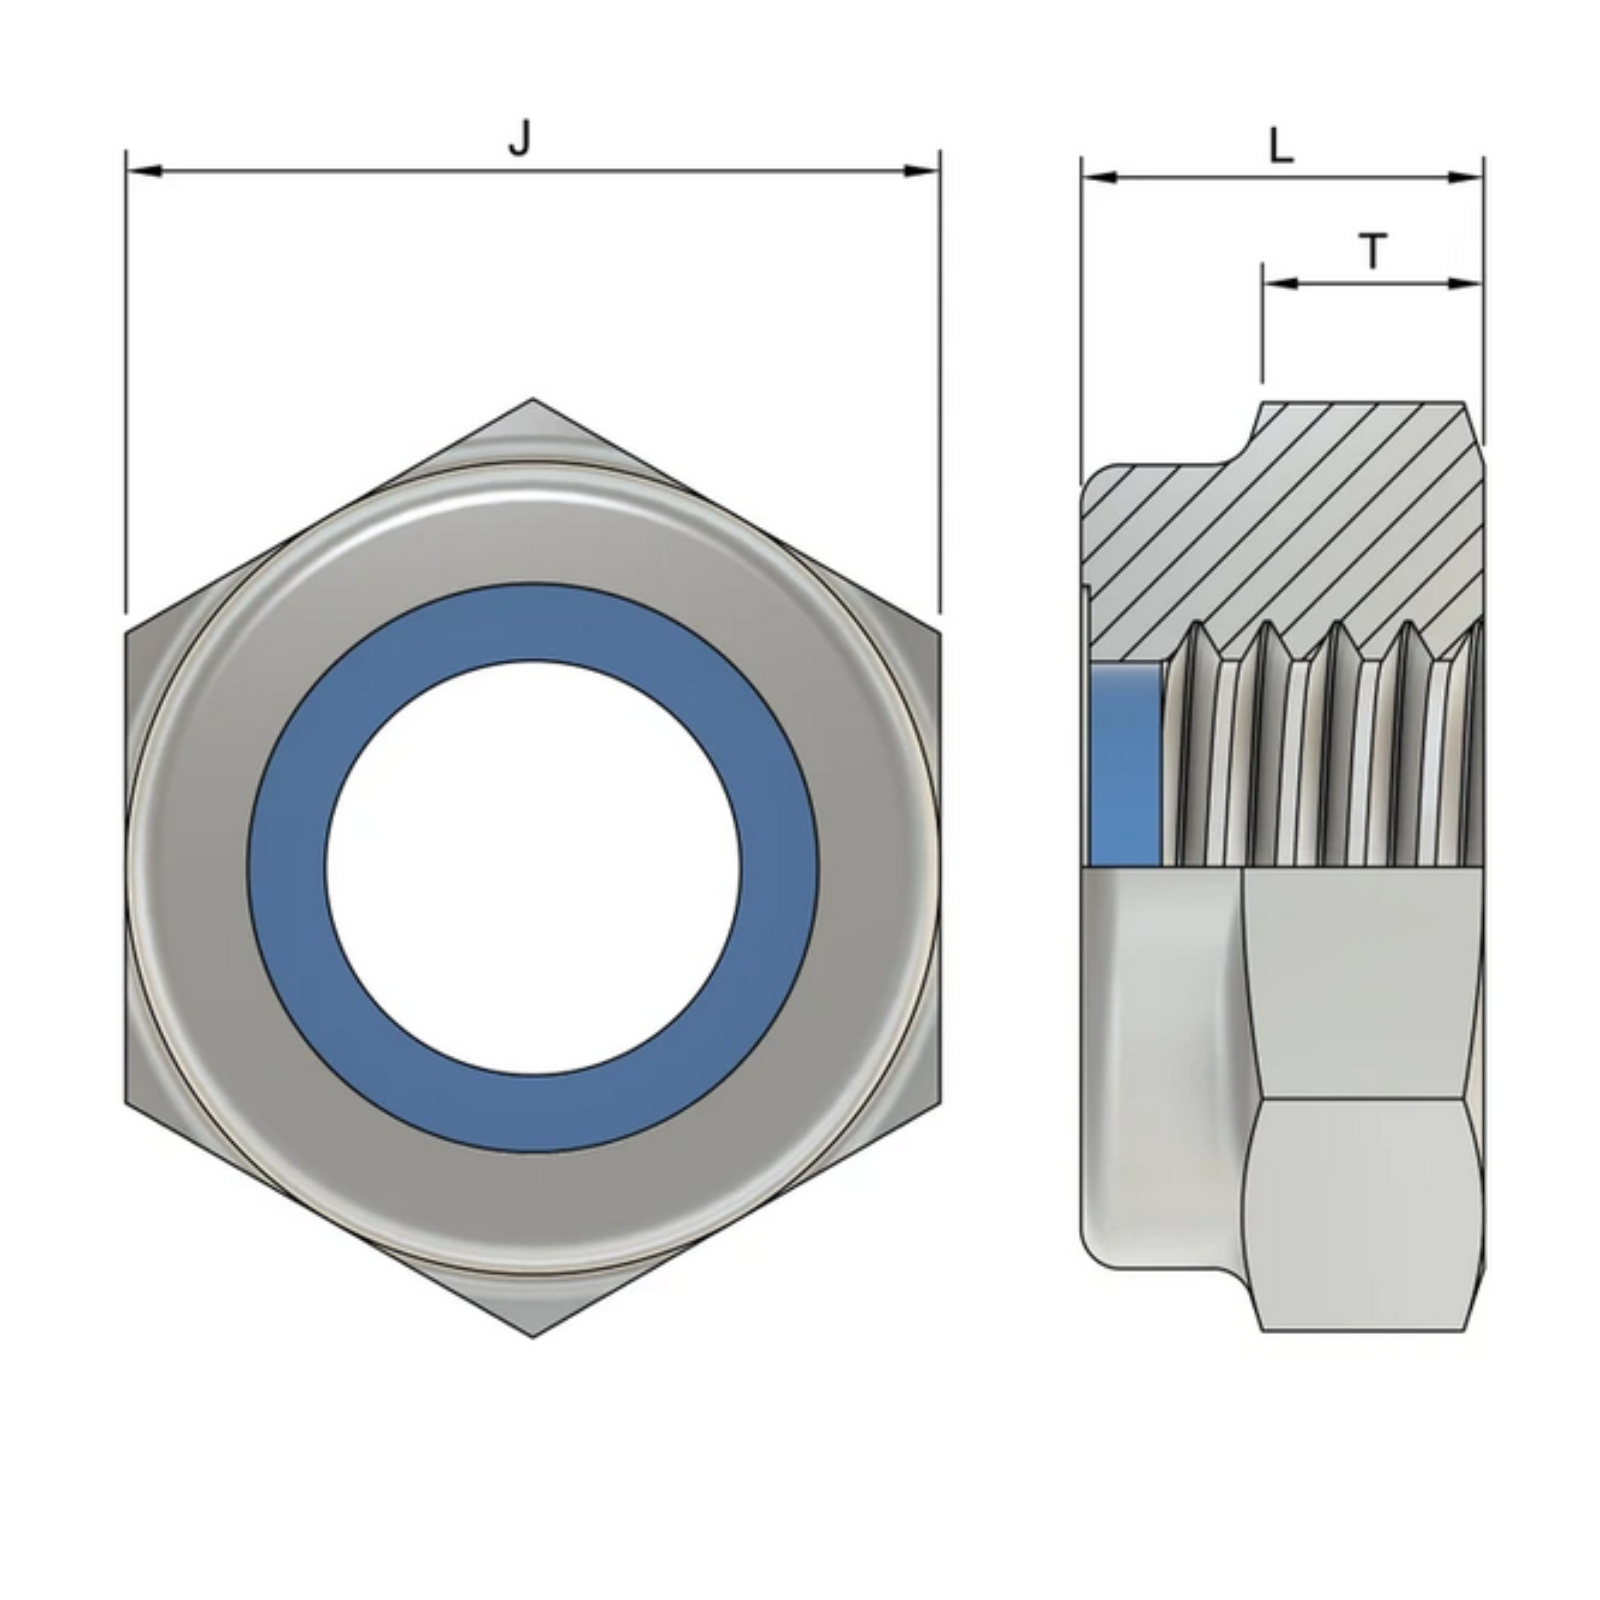 M5 Hexagon Nylon Locking Nuts (DIN 985) - Stainless Steel (A4)